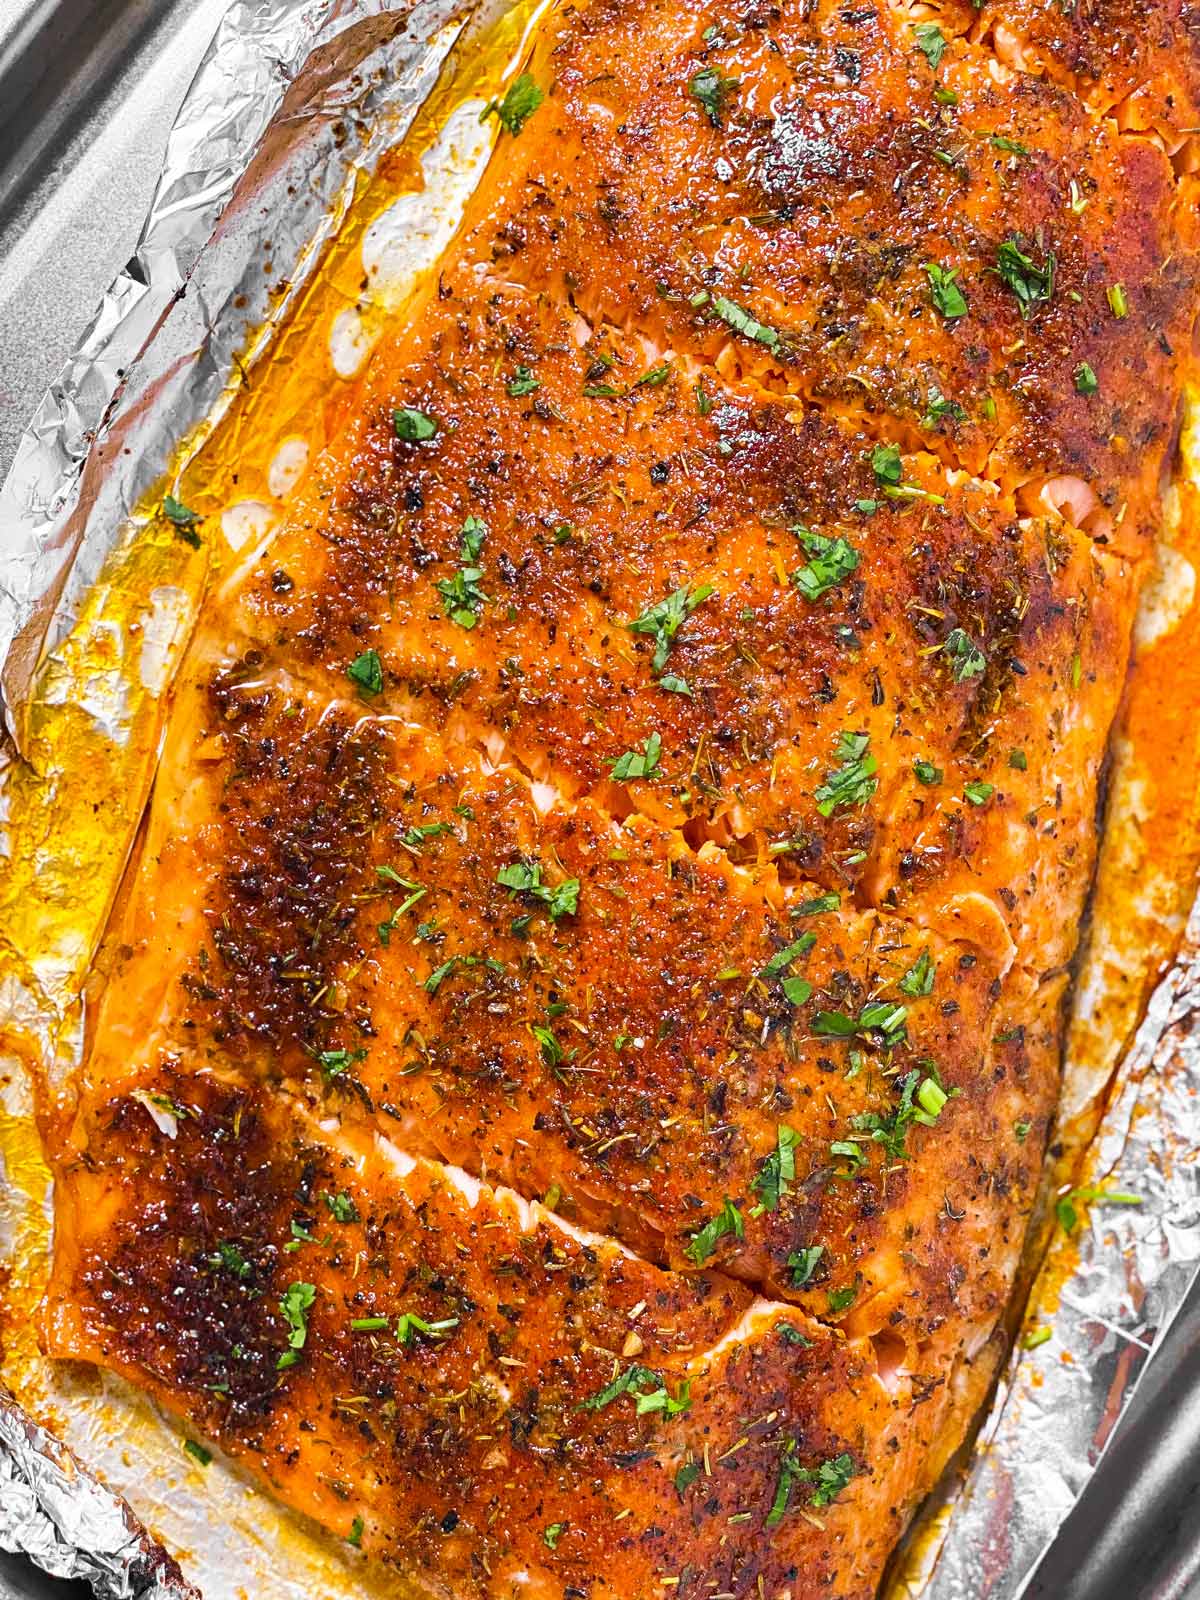 Capri - Enjoy oven baked salmon topped with garlic butter